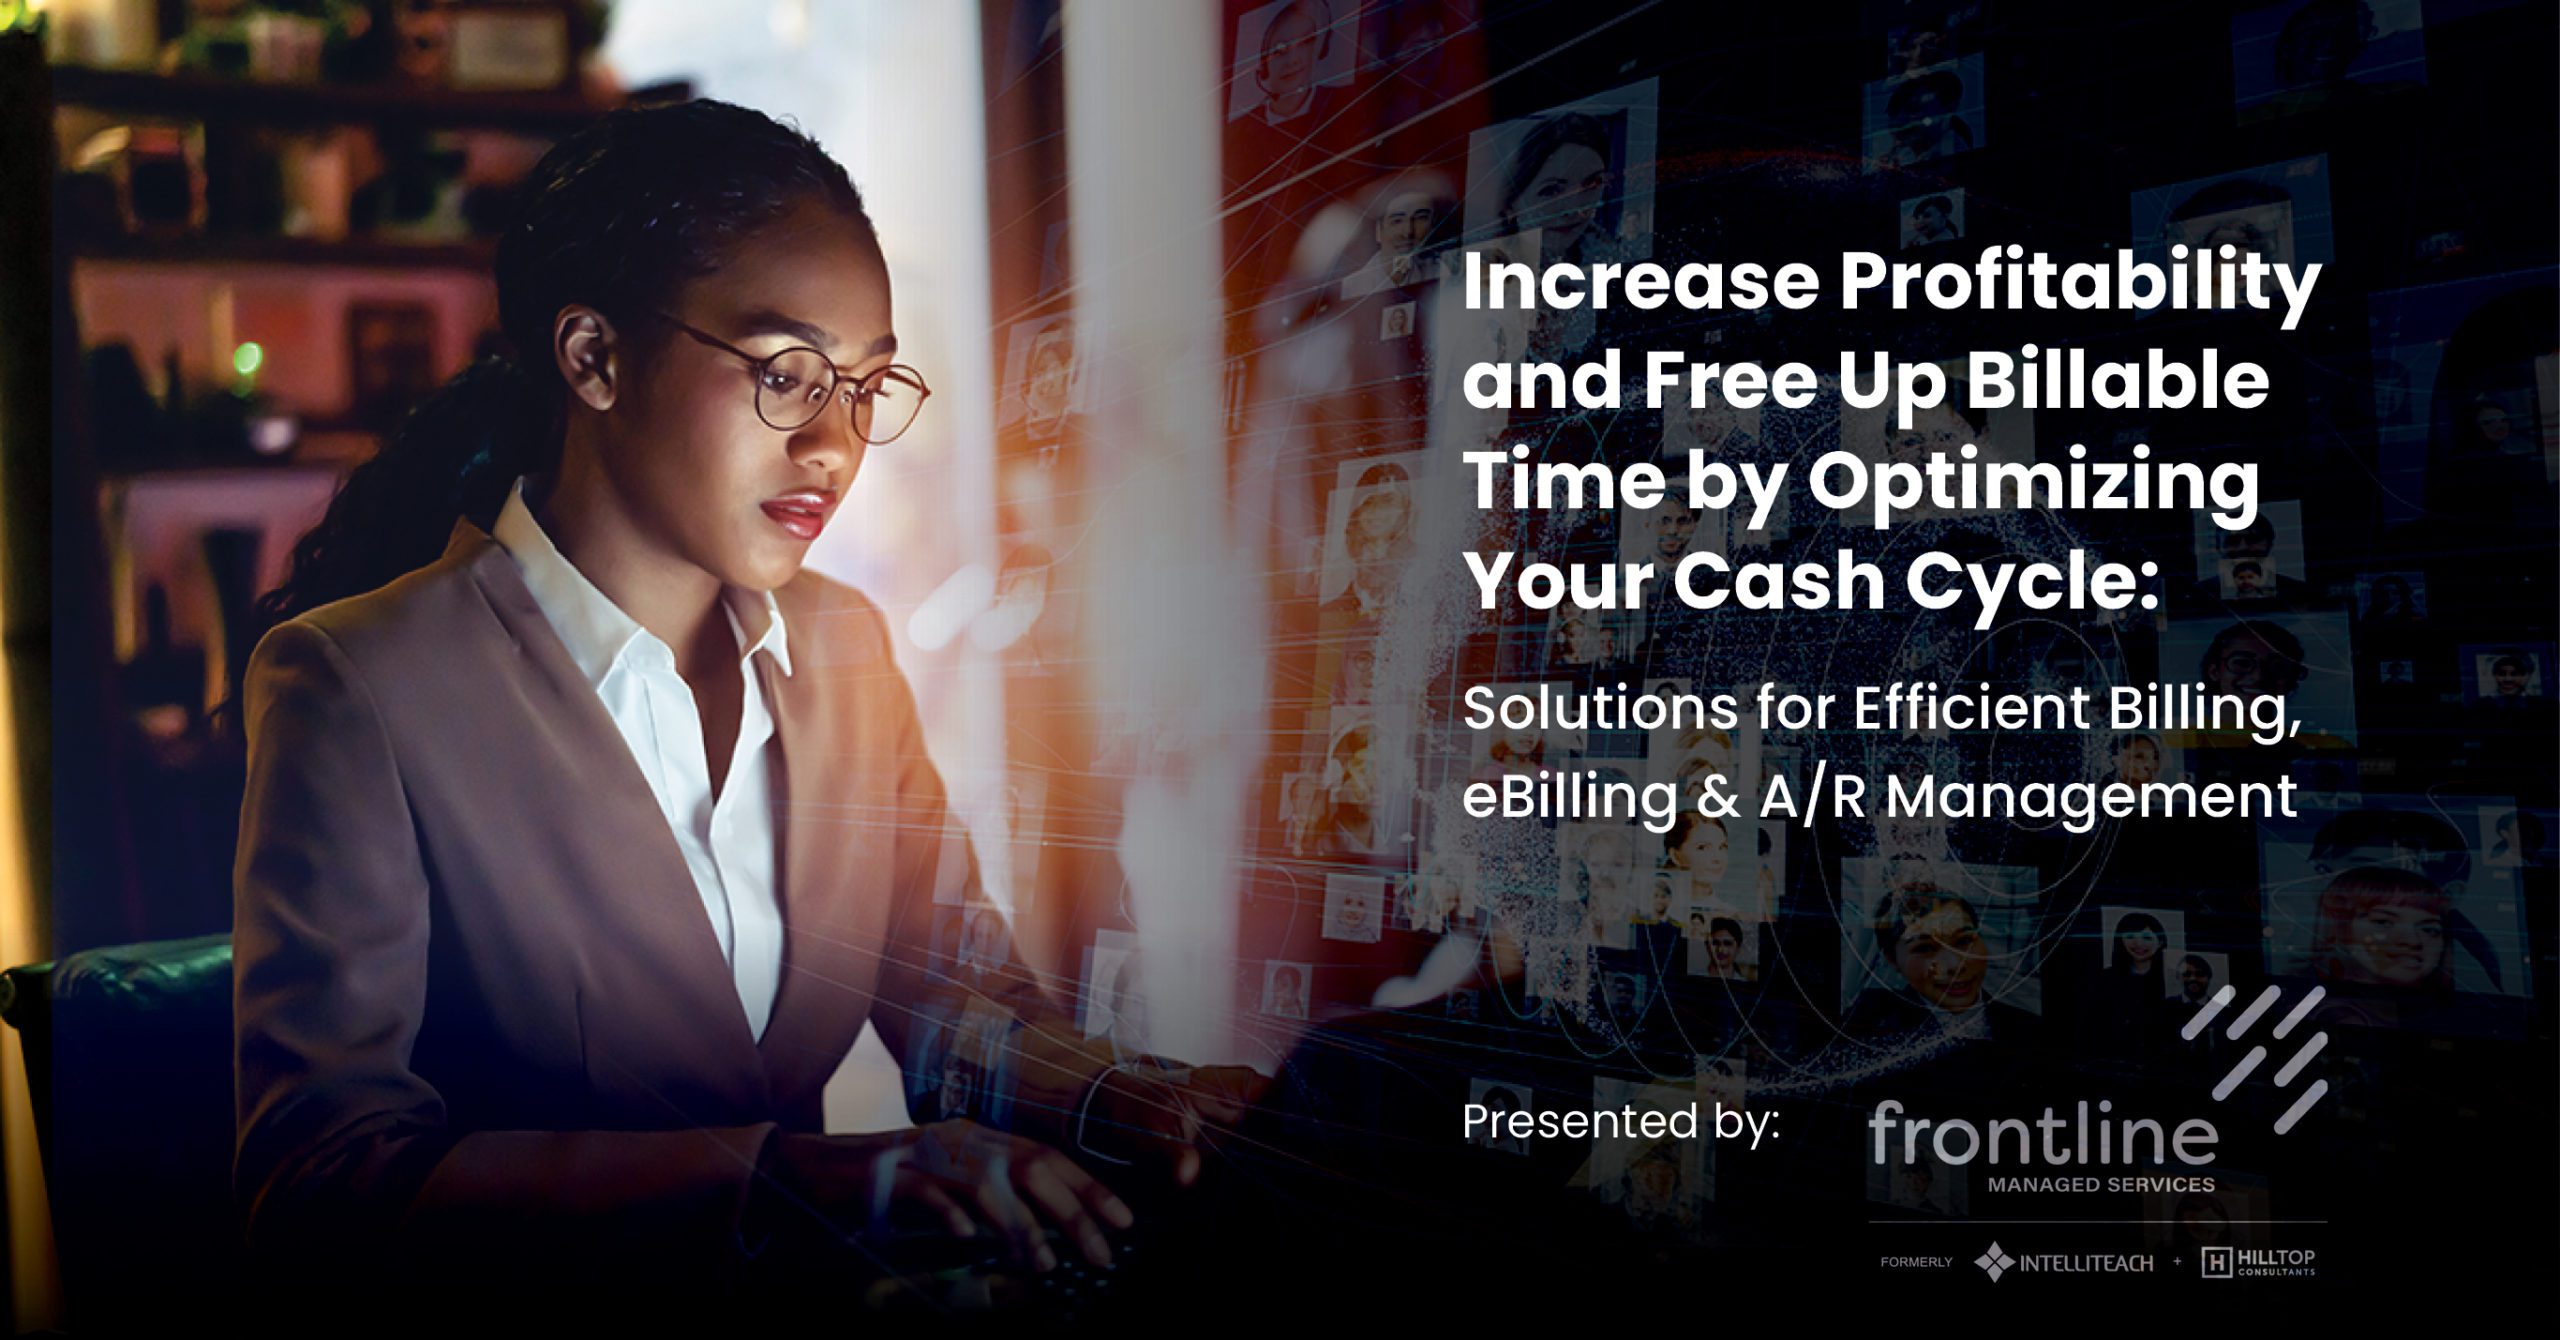 FrontlineMS_Increase Profitability and Free Up Billable Time by Optimizing Your Cash Cycle_Website graphic